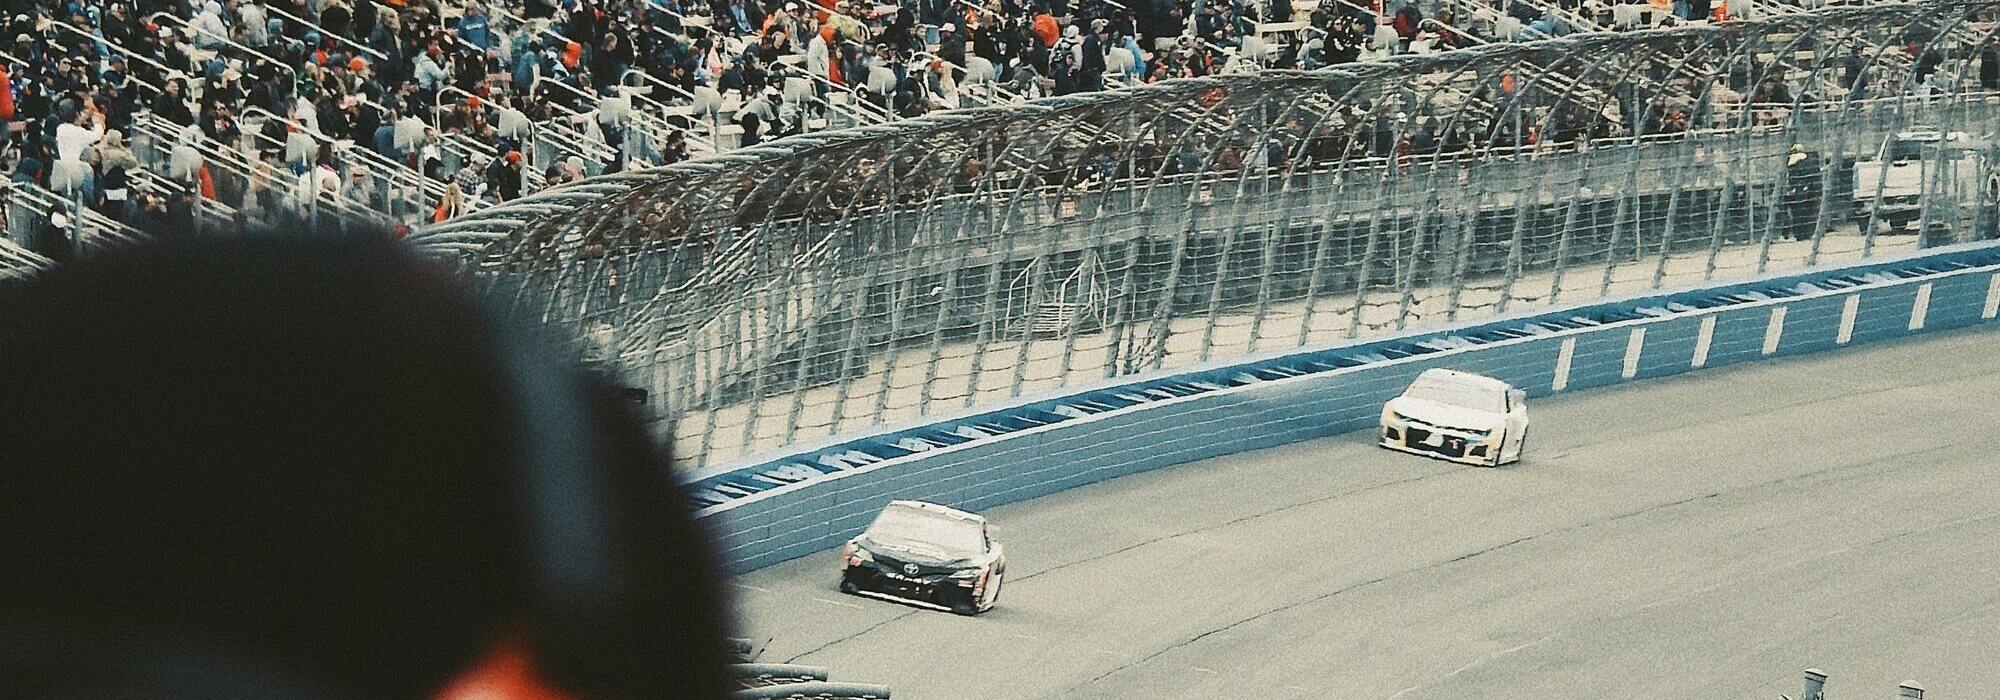 A NASCAR Cup Series live event